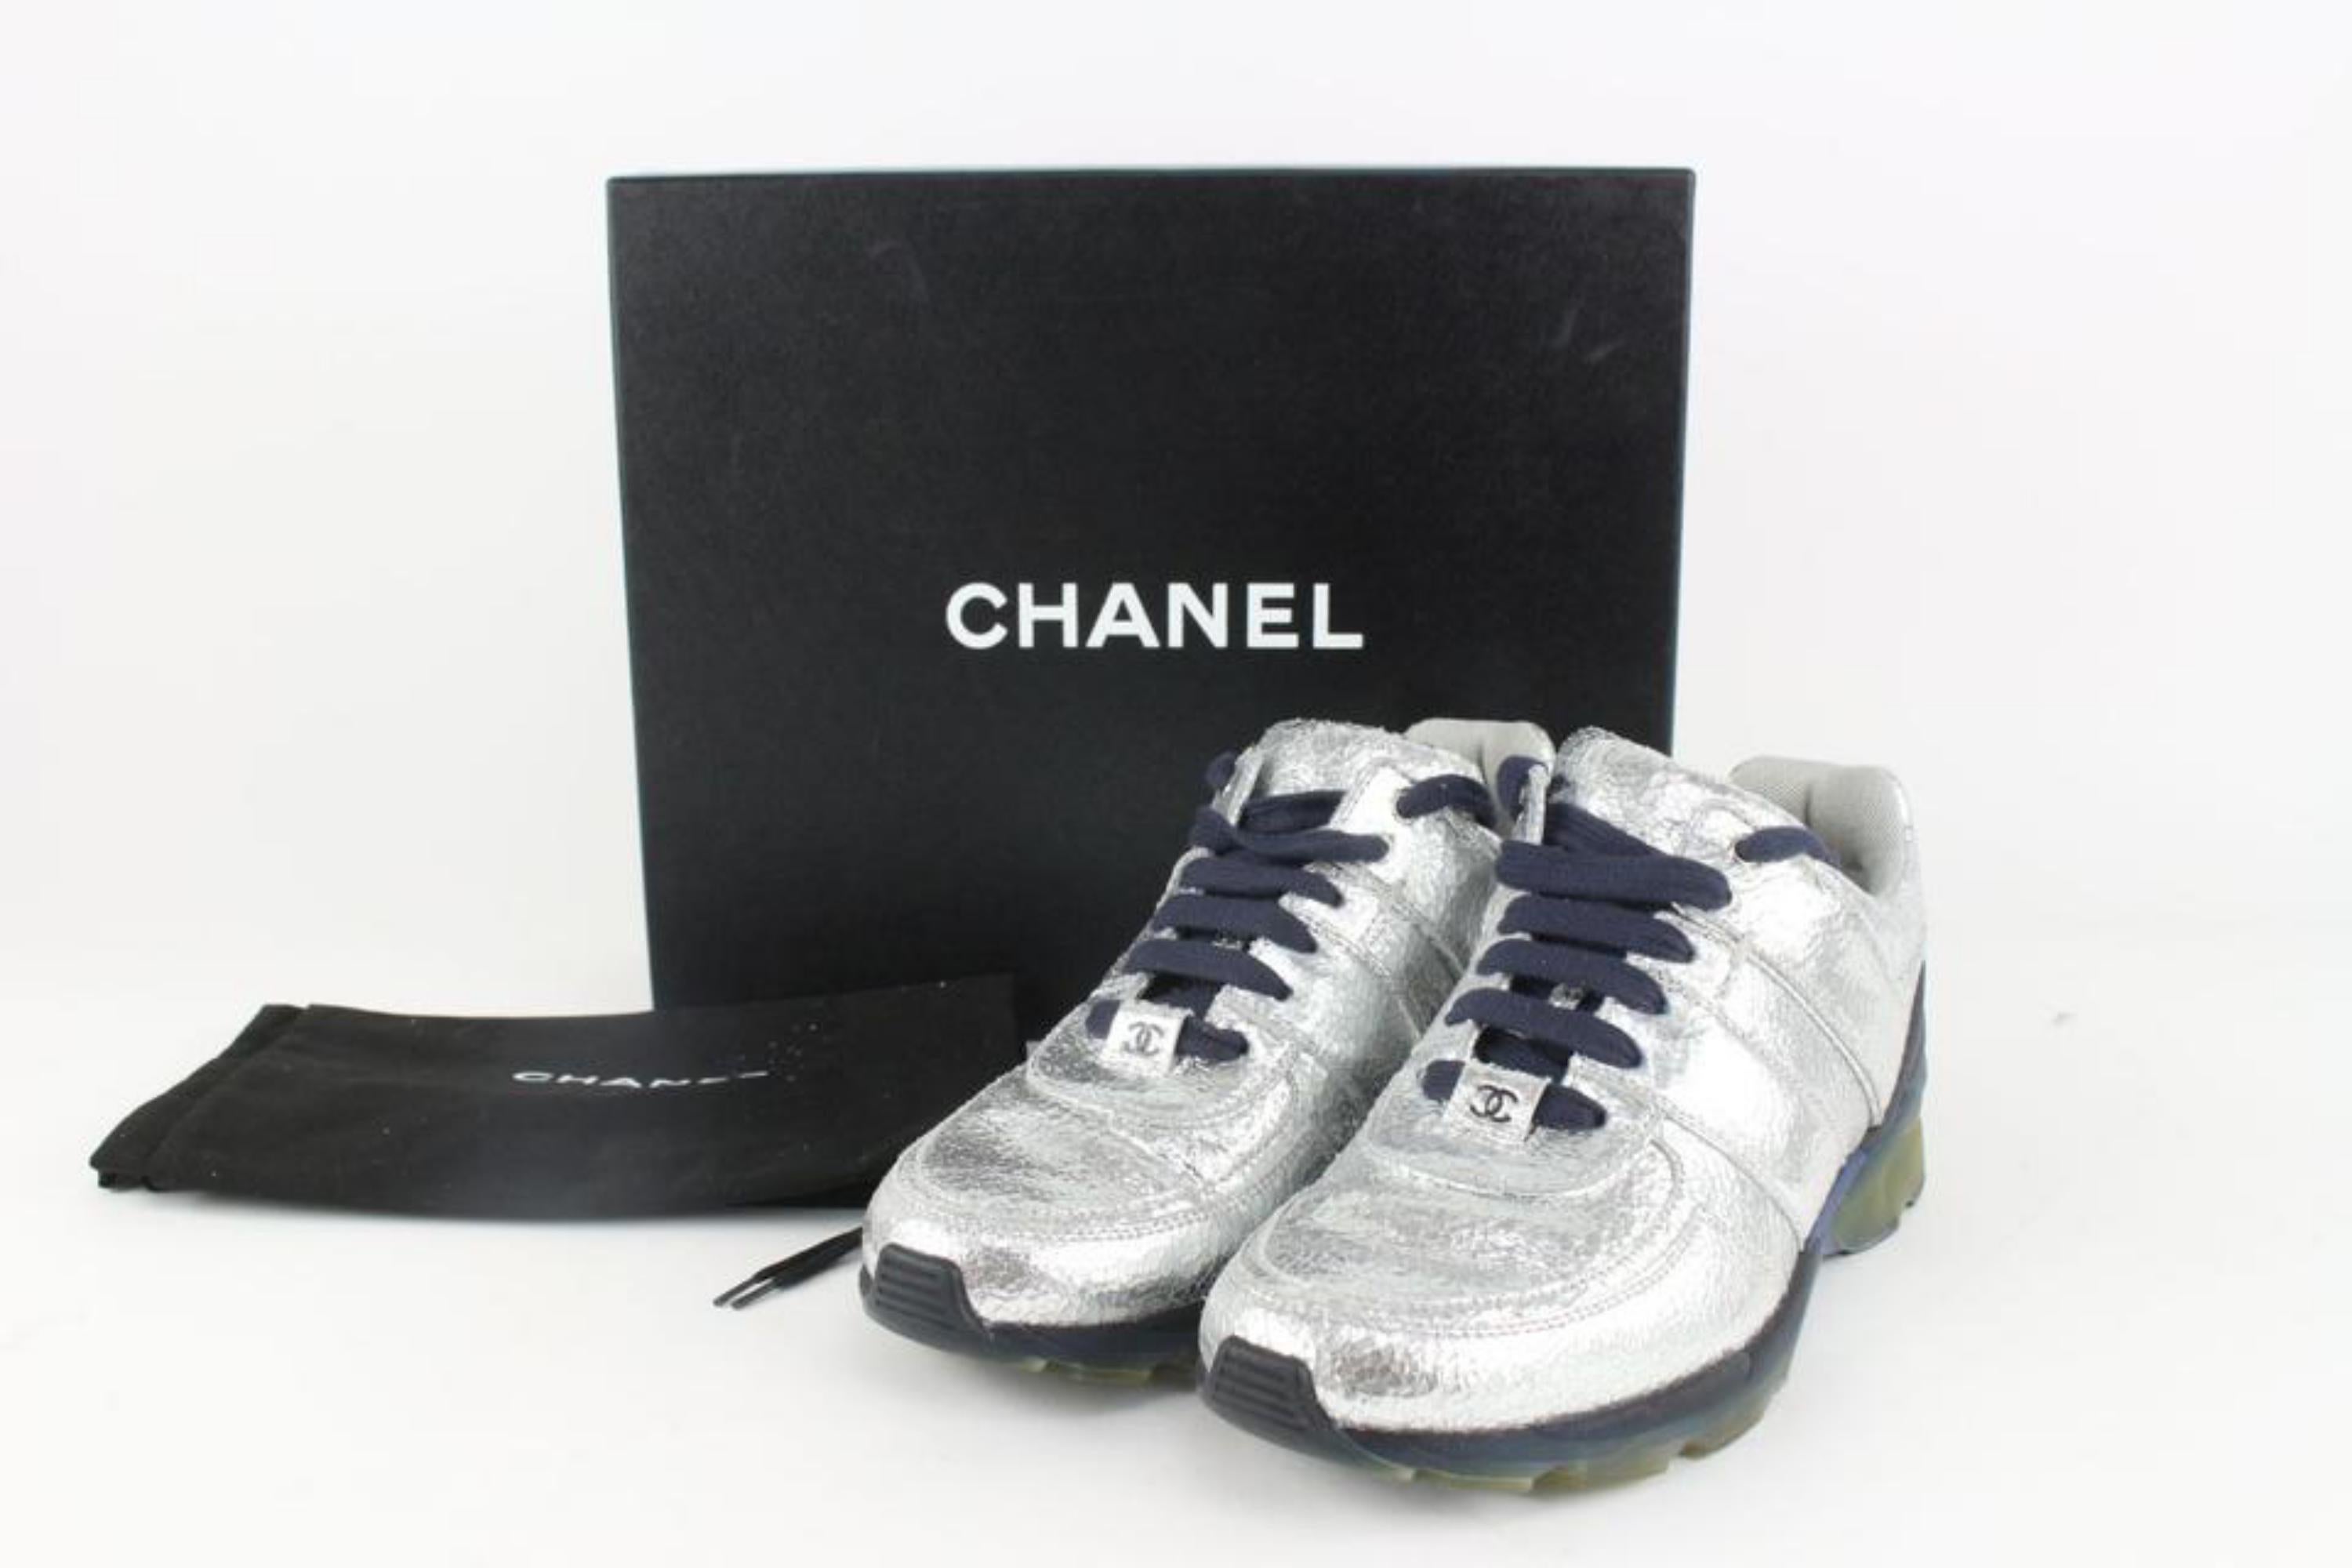 Chanel Women's 38 G31711 Silver Quilted CC Trainer Sneaker 2CC1116
Date Code/Serial Number: R G 31711
Made In: Italy
Measurements: Length:  11